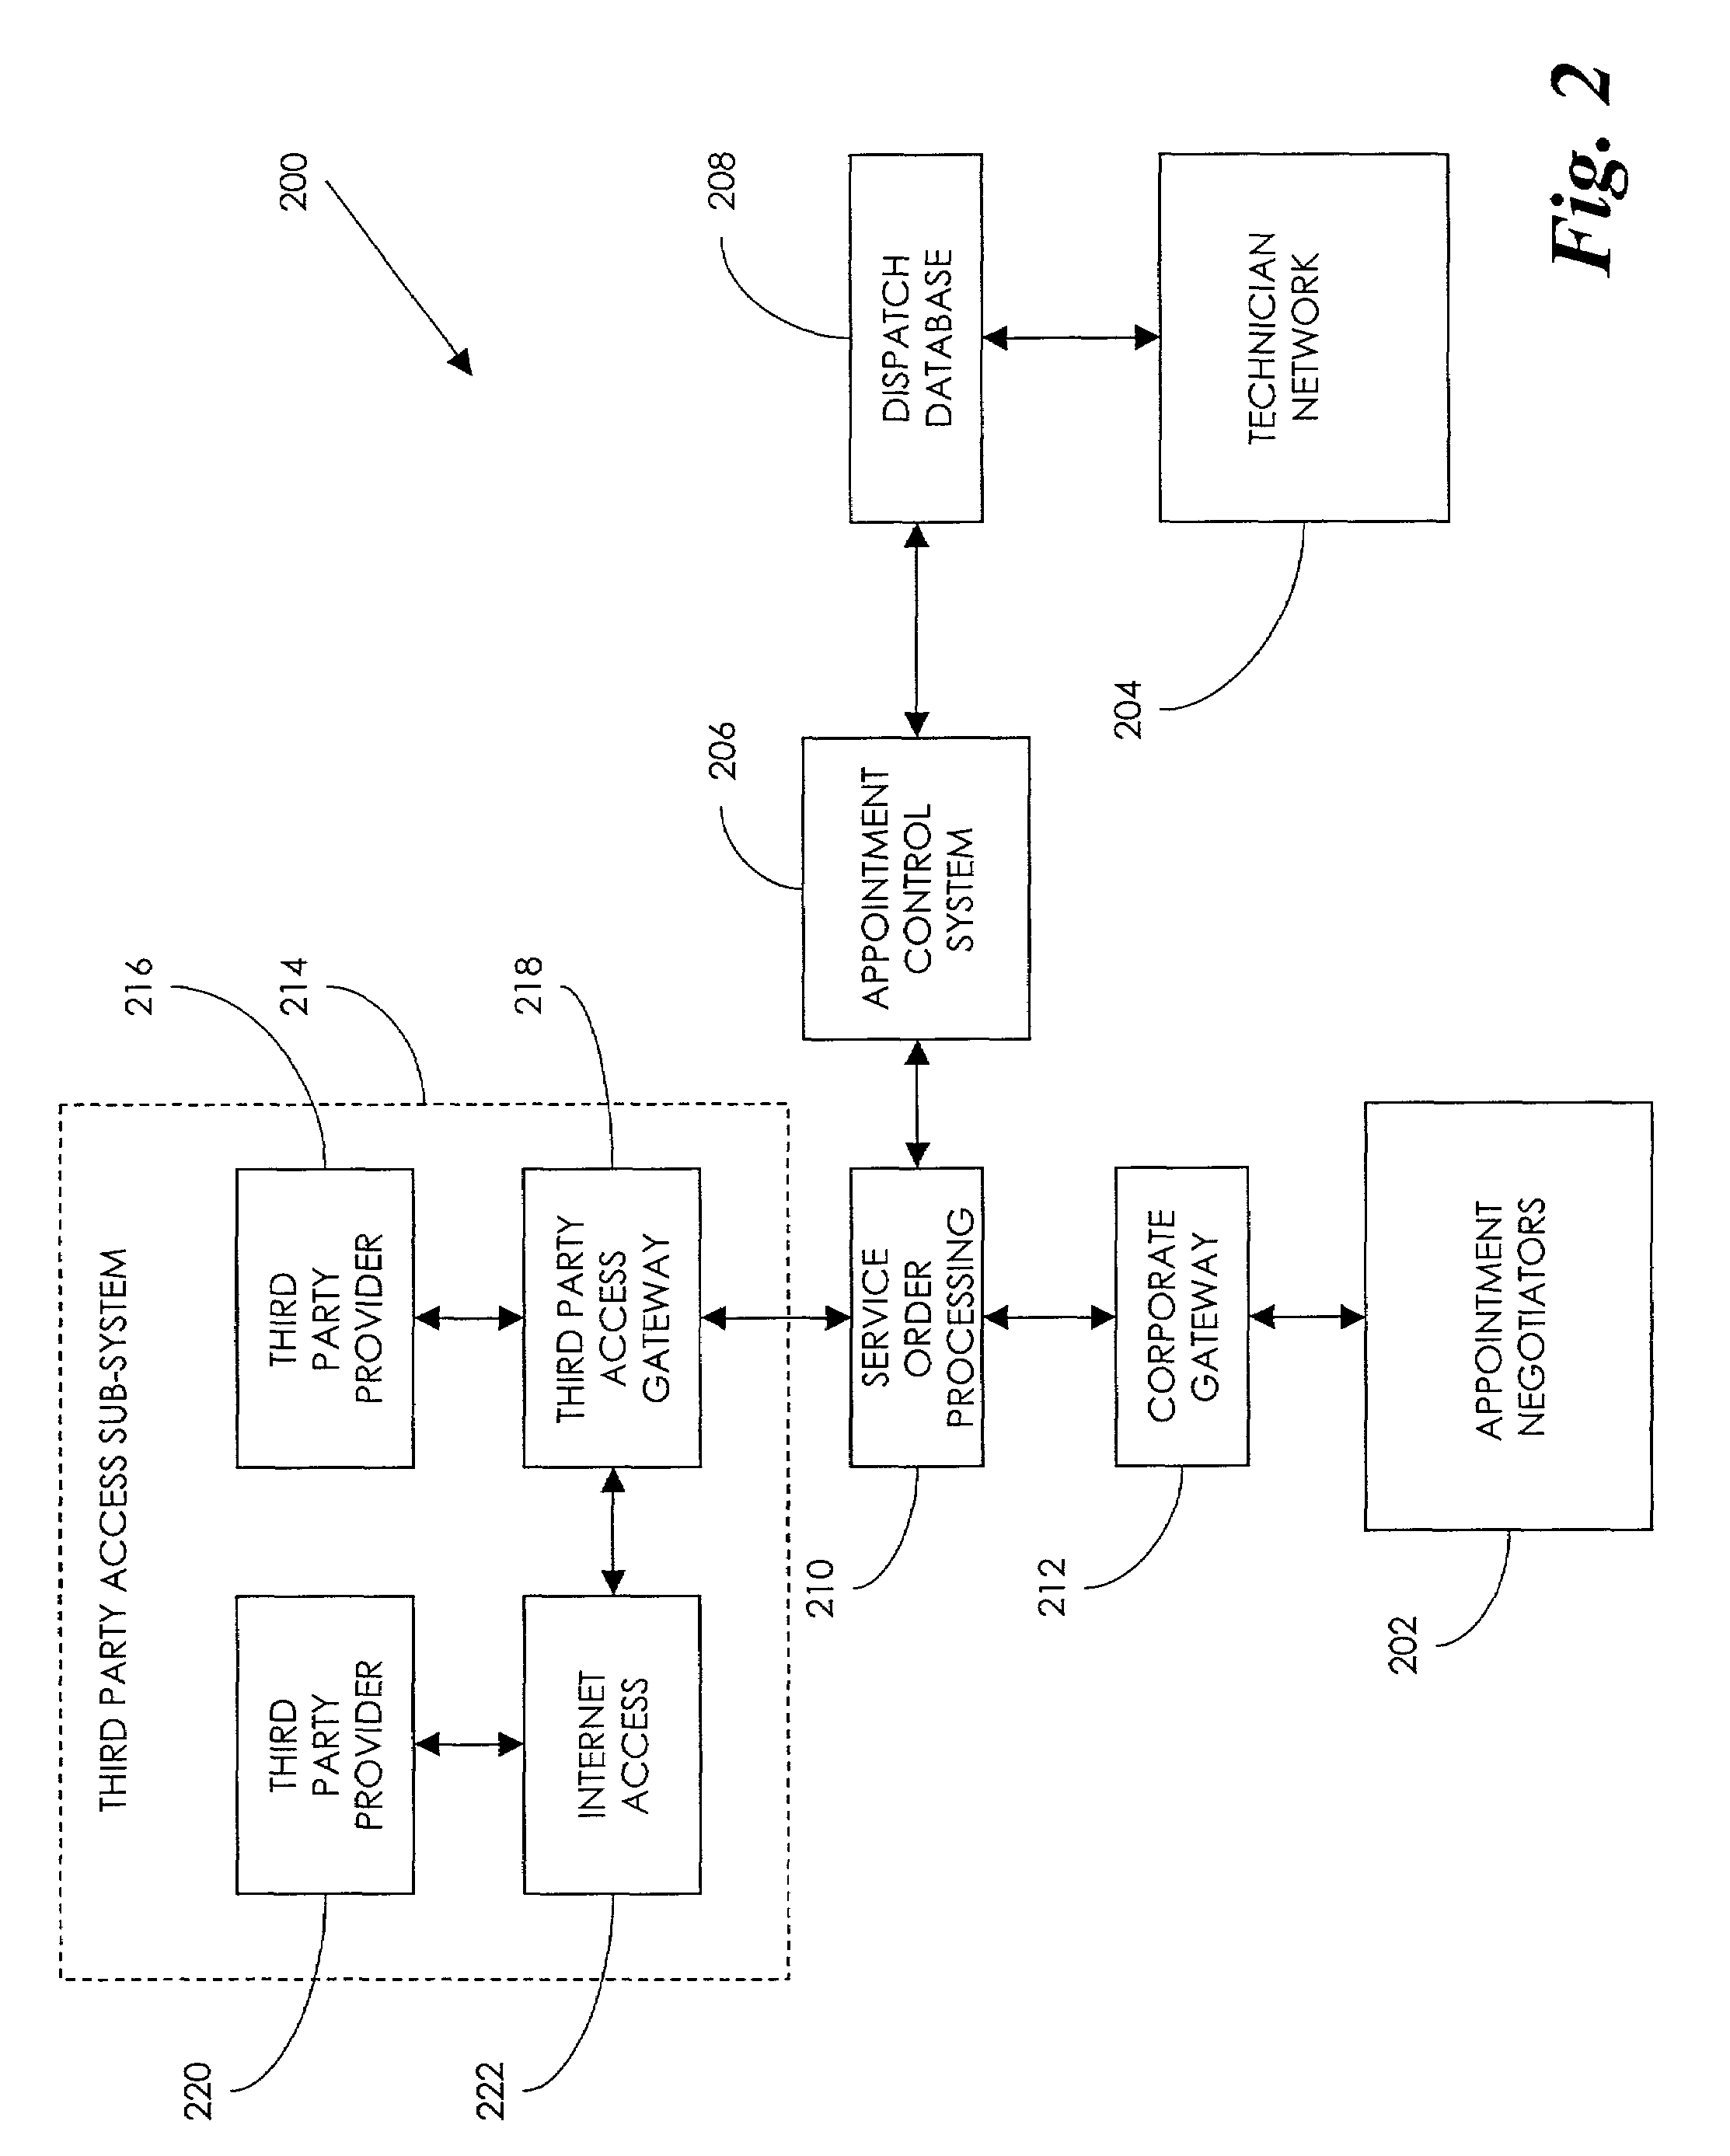 Automated real-time appointment control by continuously updating resources for possible rescheduling of existing appointments